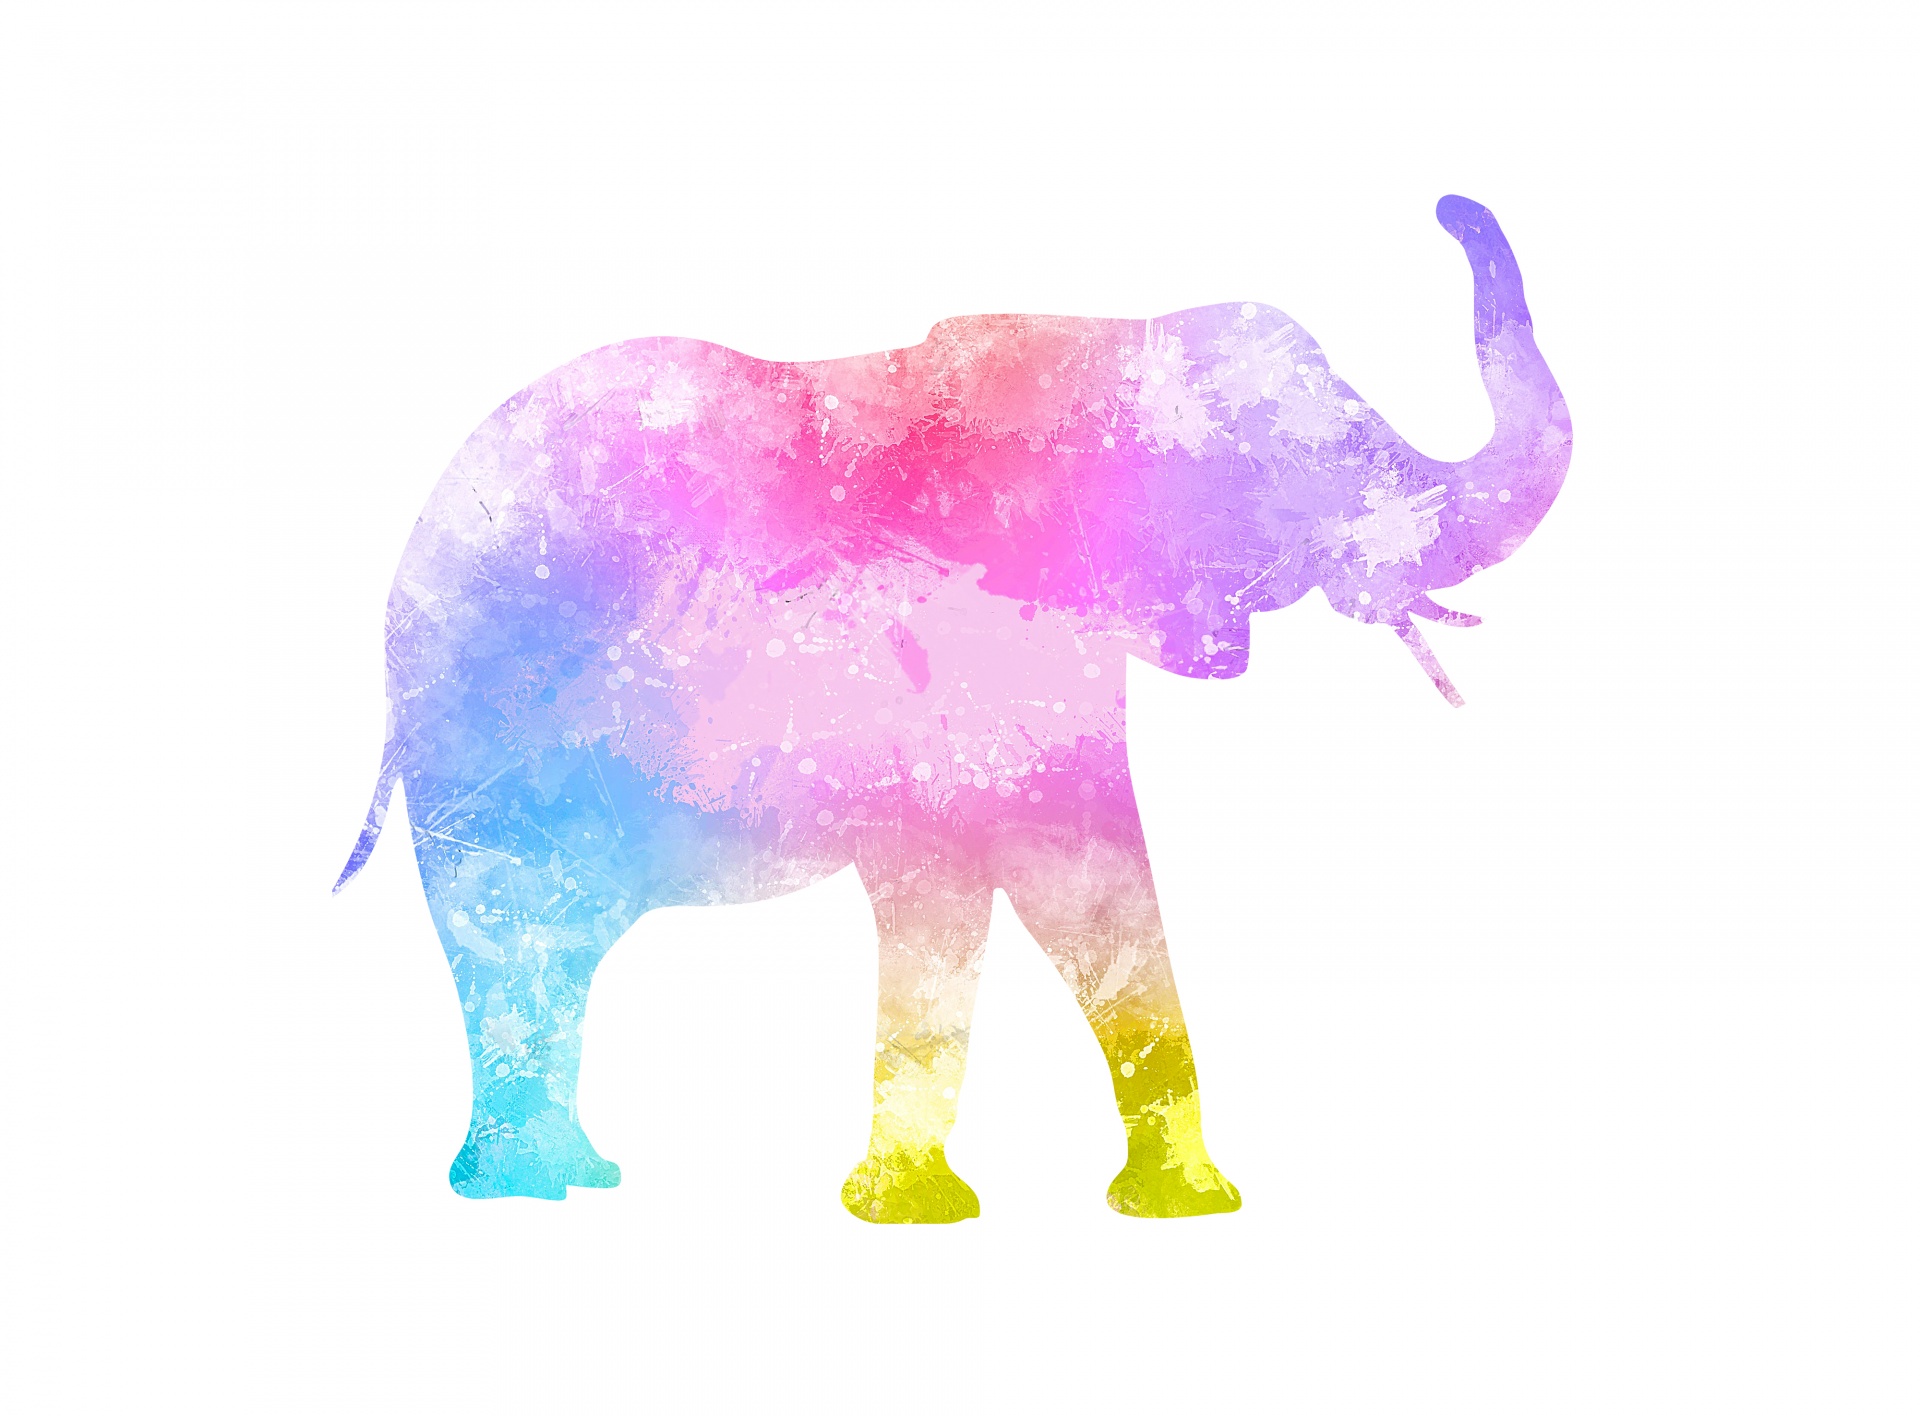 Elephant Watercolor Painting Colors